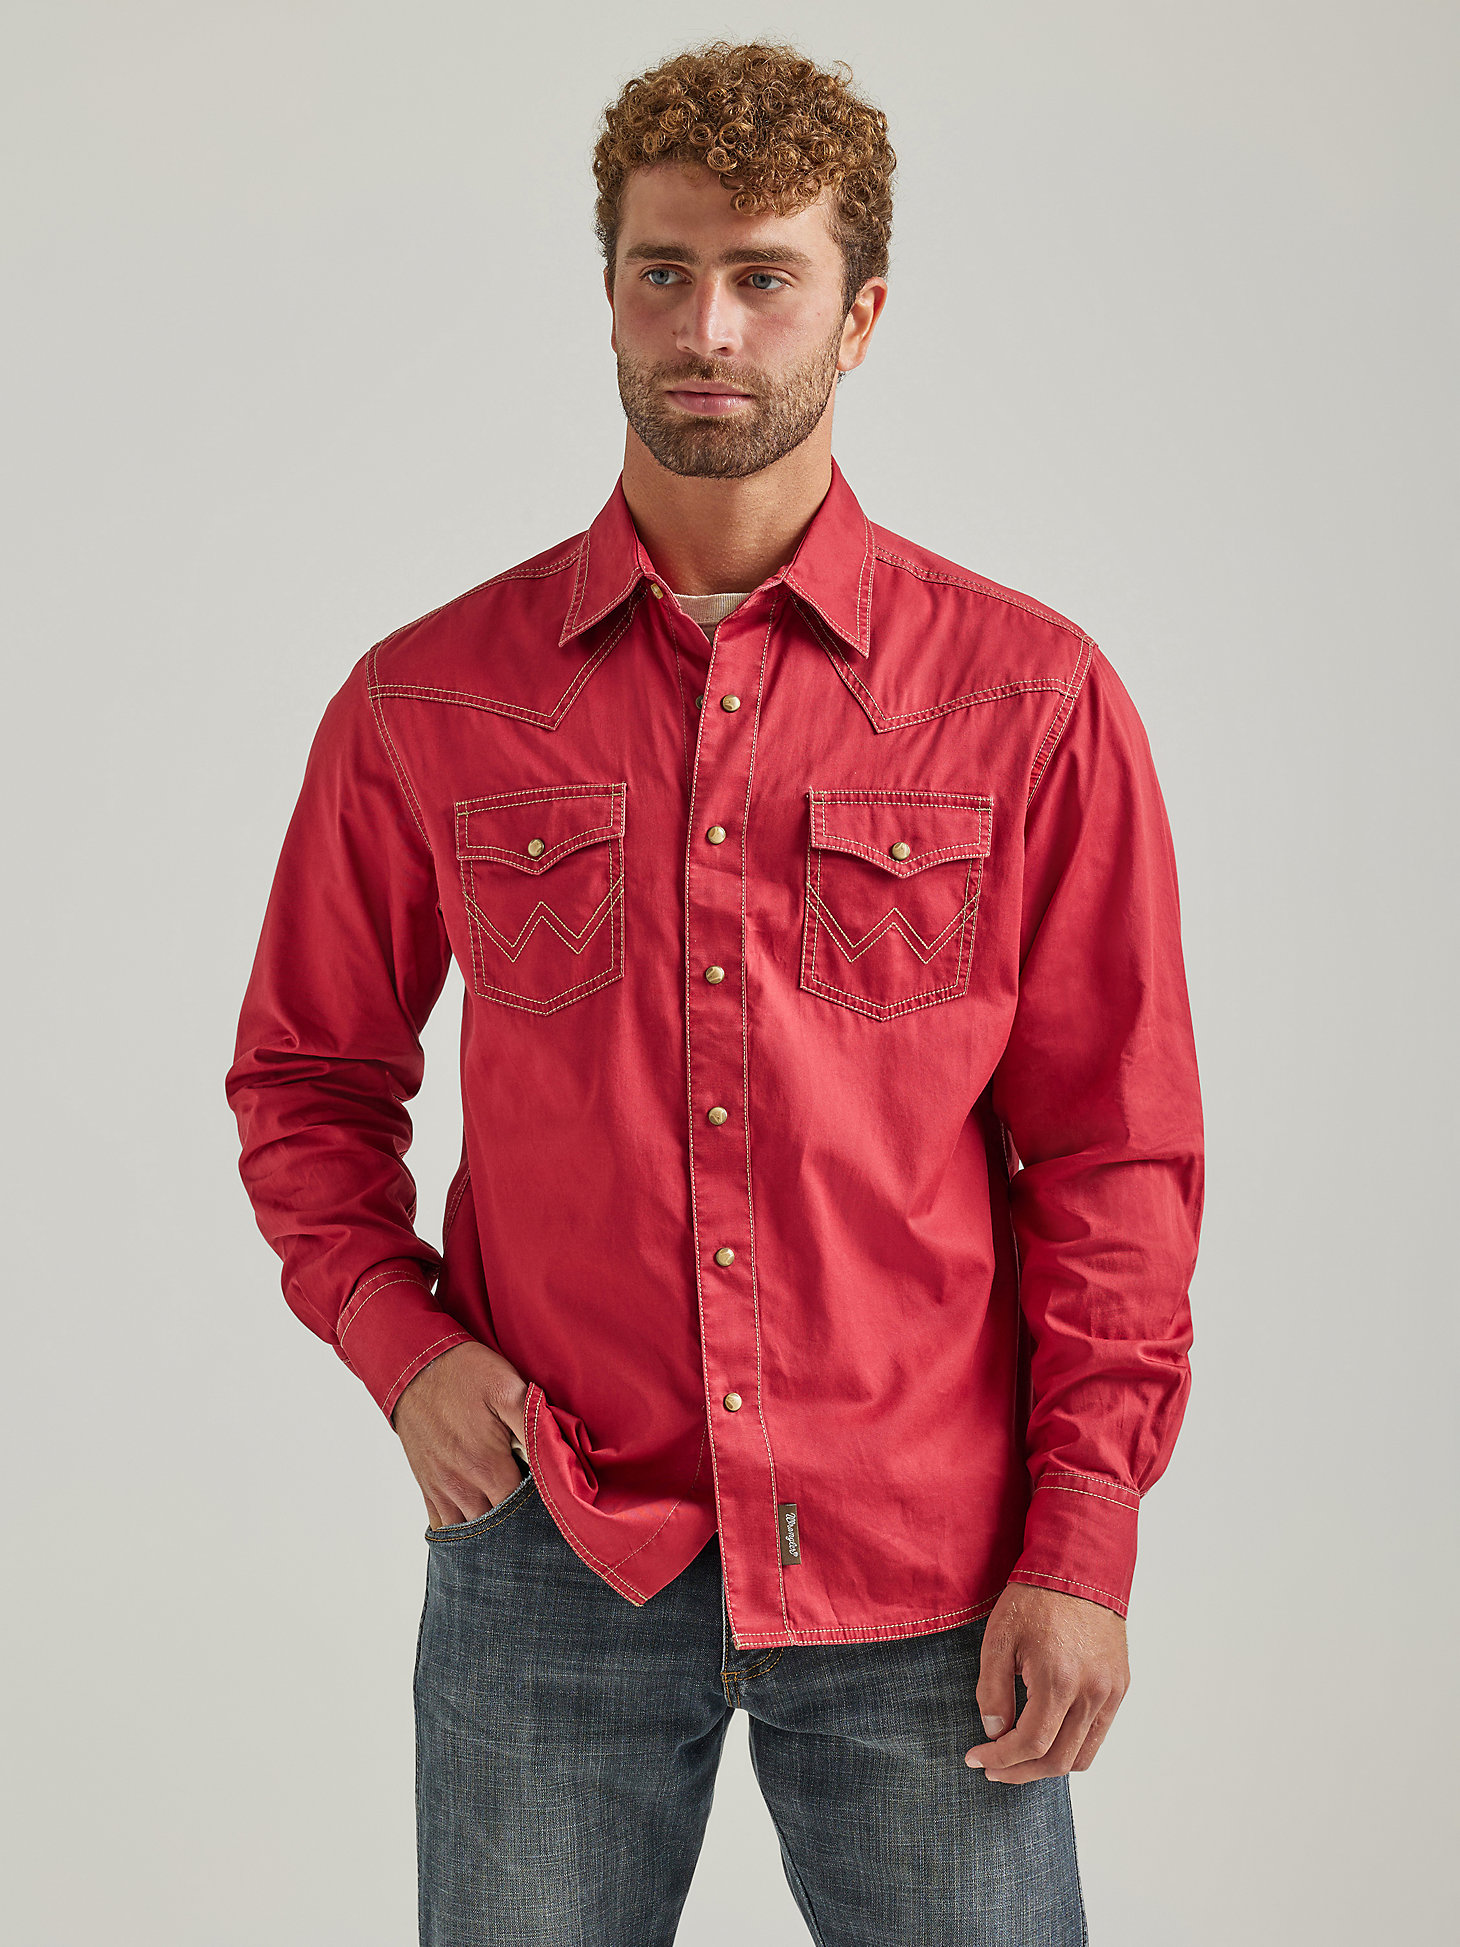 Men's Wrangler Retro® Premium Long Sleeve Button-Down Solid Shirt in Chili Red main view